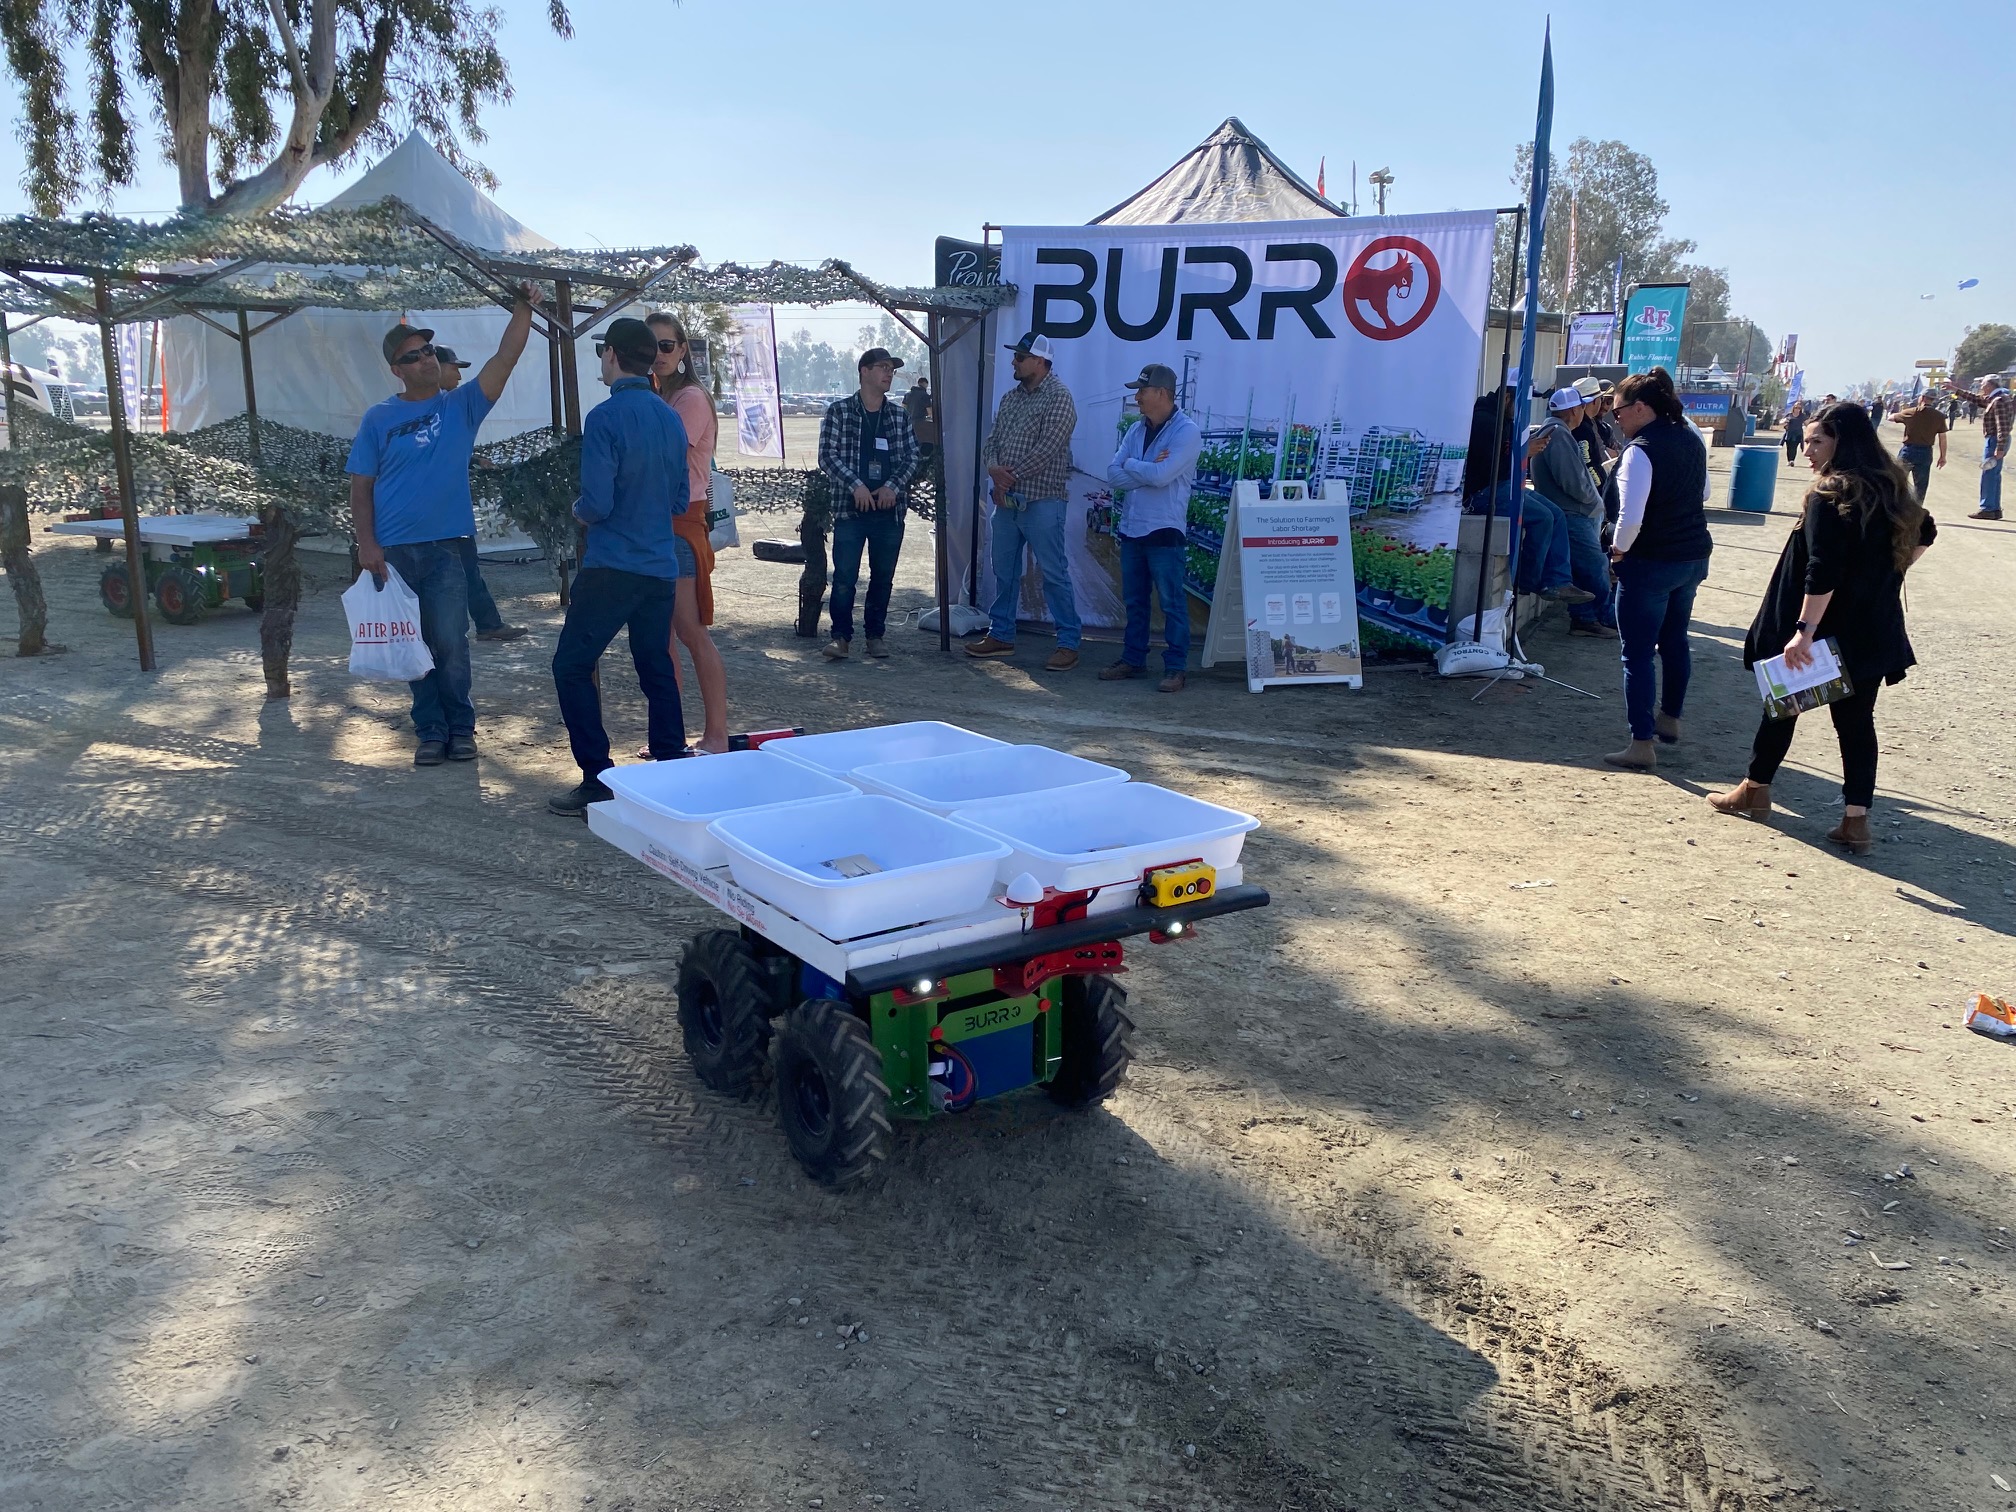  Burro was winner of one of the top-10 new products at the World Ag Expo. The company offers autonomous, collaborative robots for heavy-weight support in grape harvest operations. The booth captured a lot of interest with its robots demonstrating movements. 